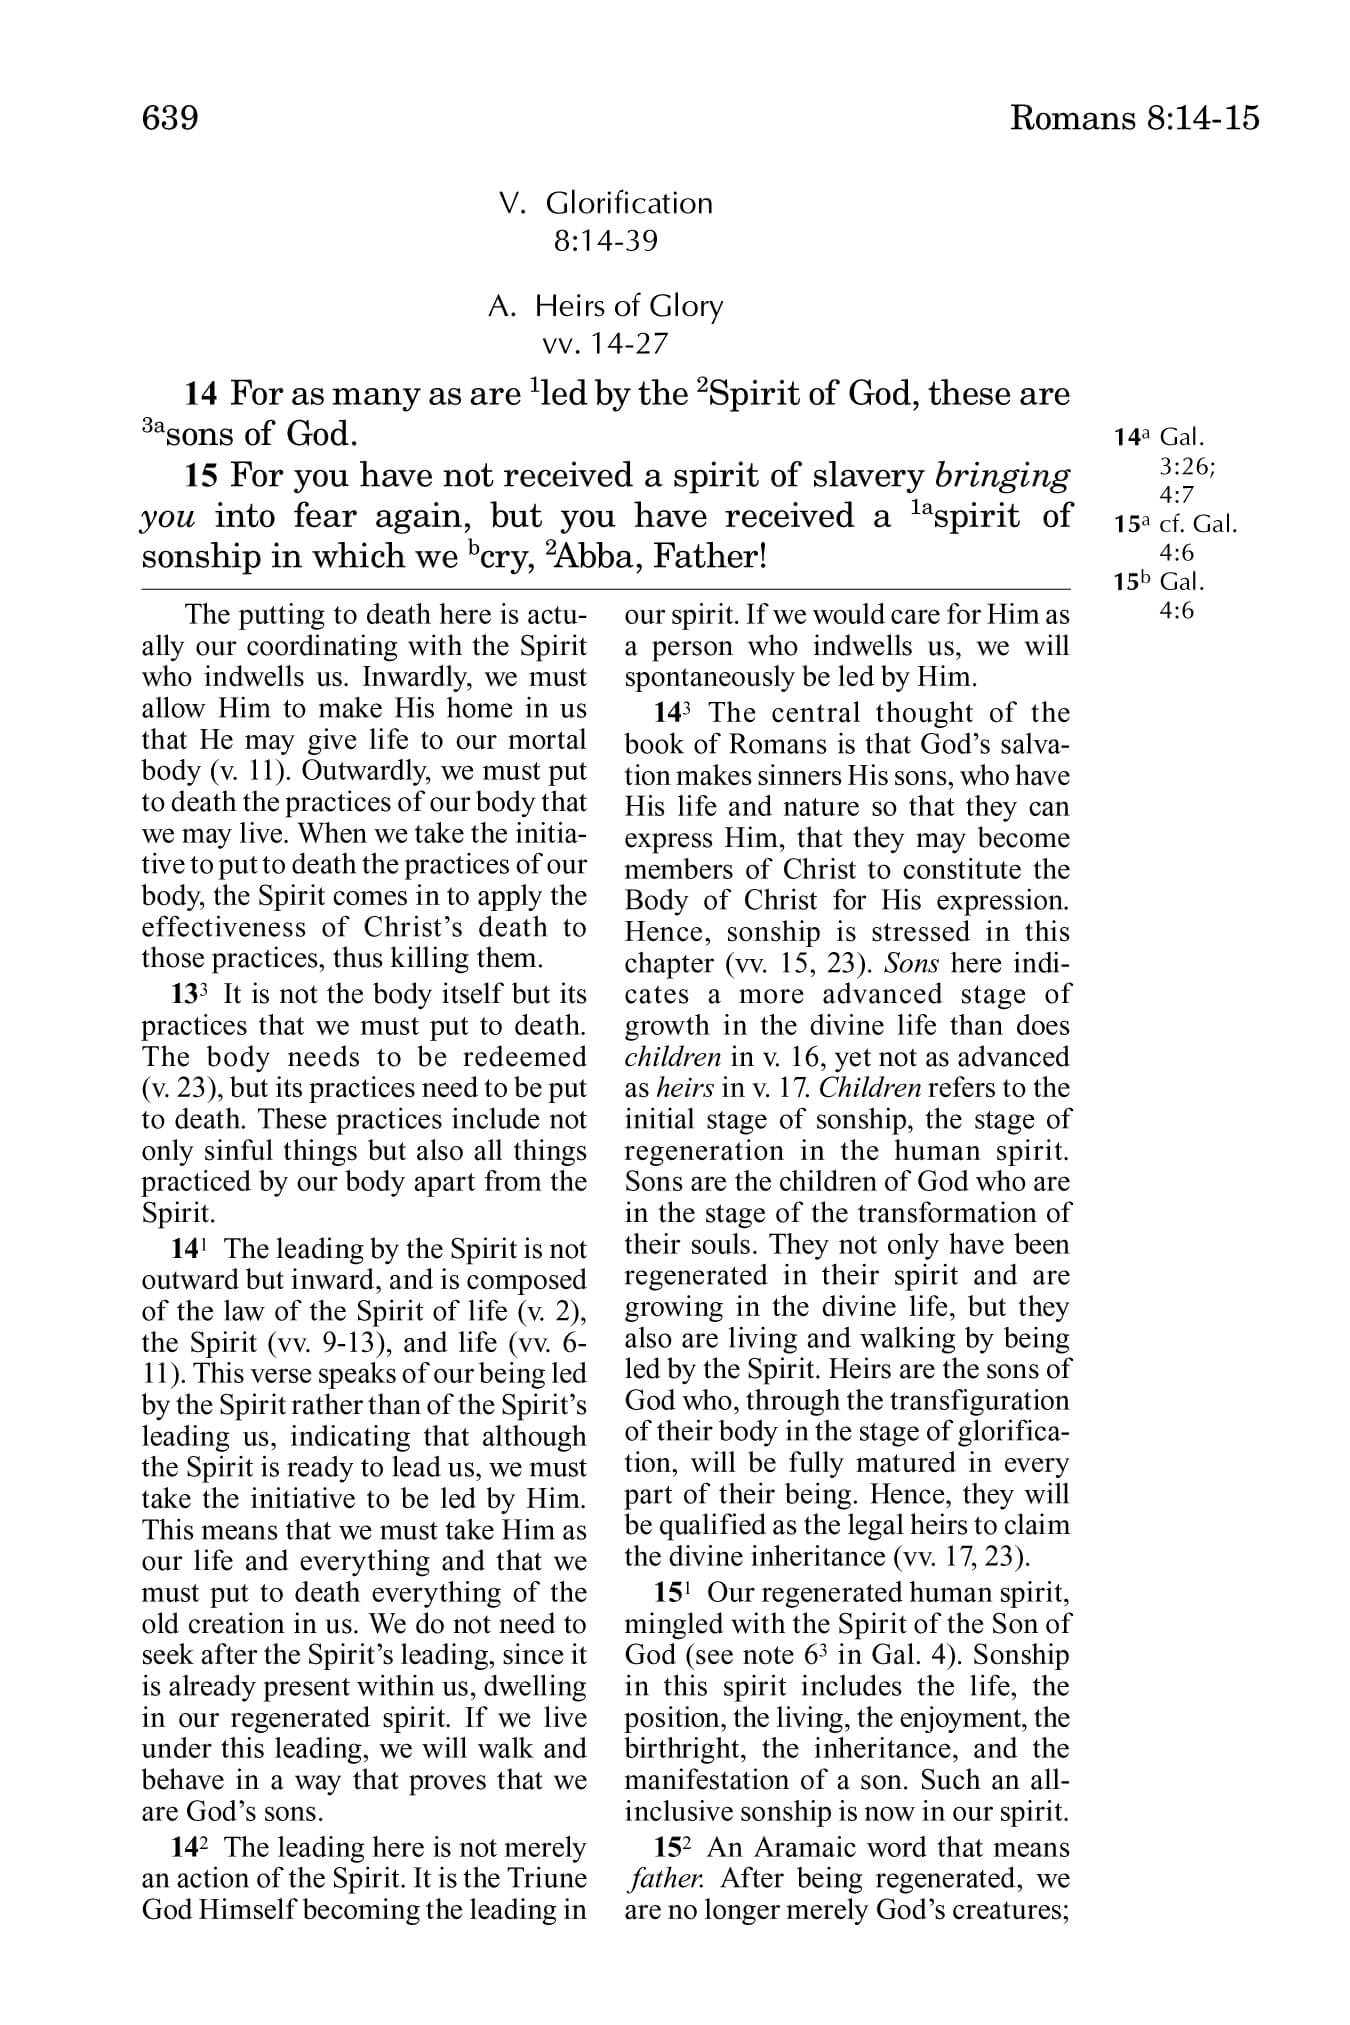 New Testament Recovery Version with Footnotes, 1991